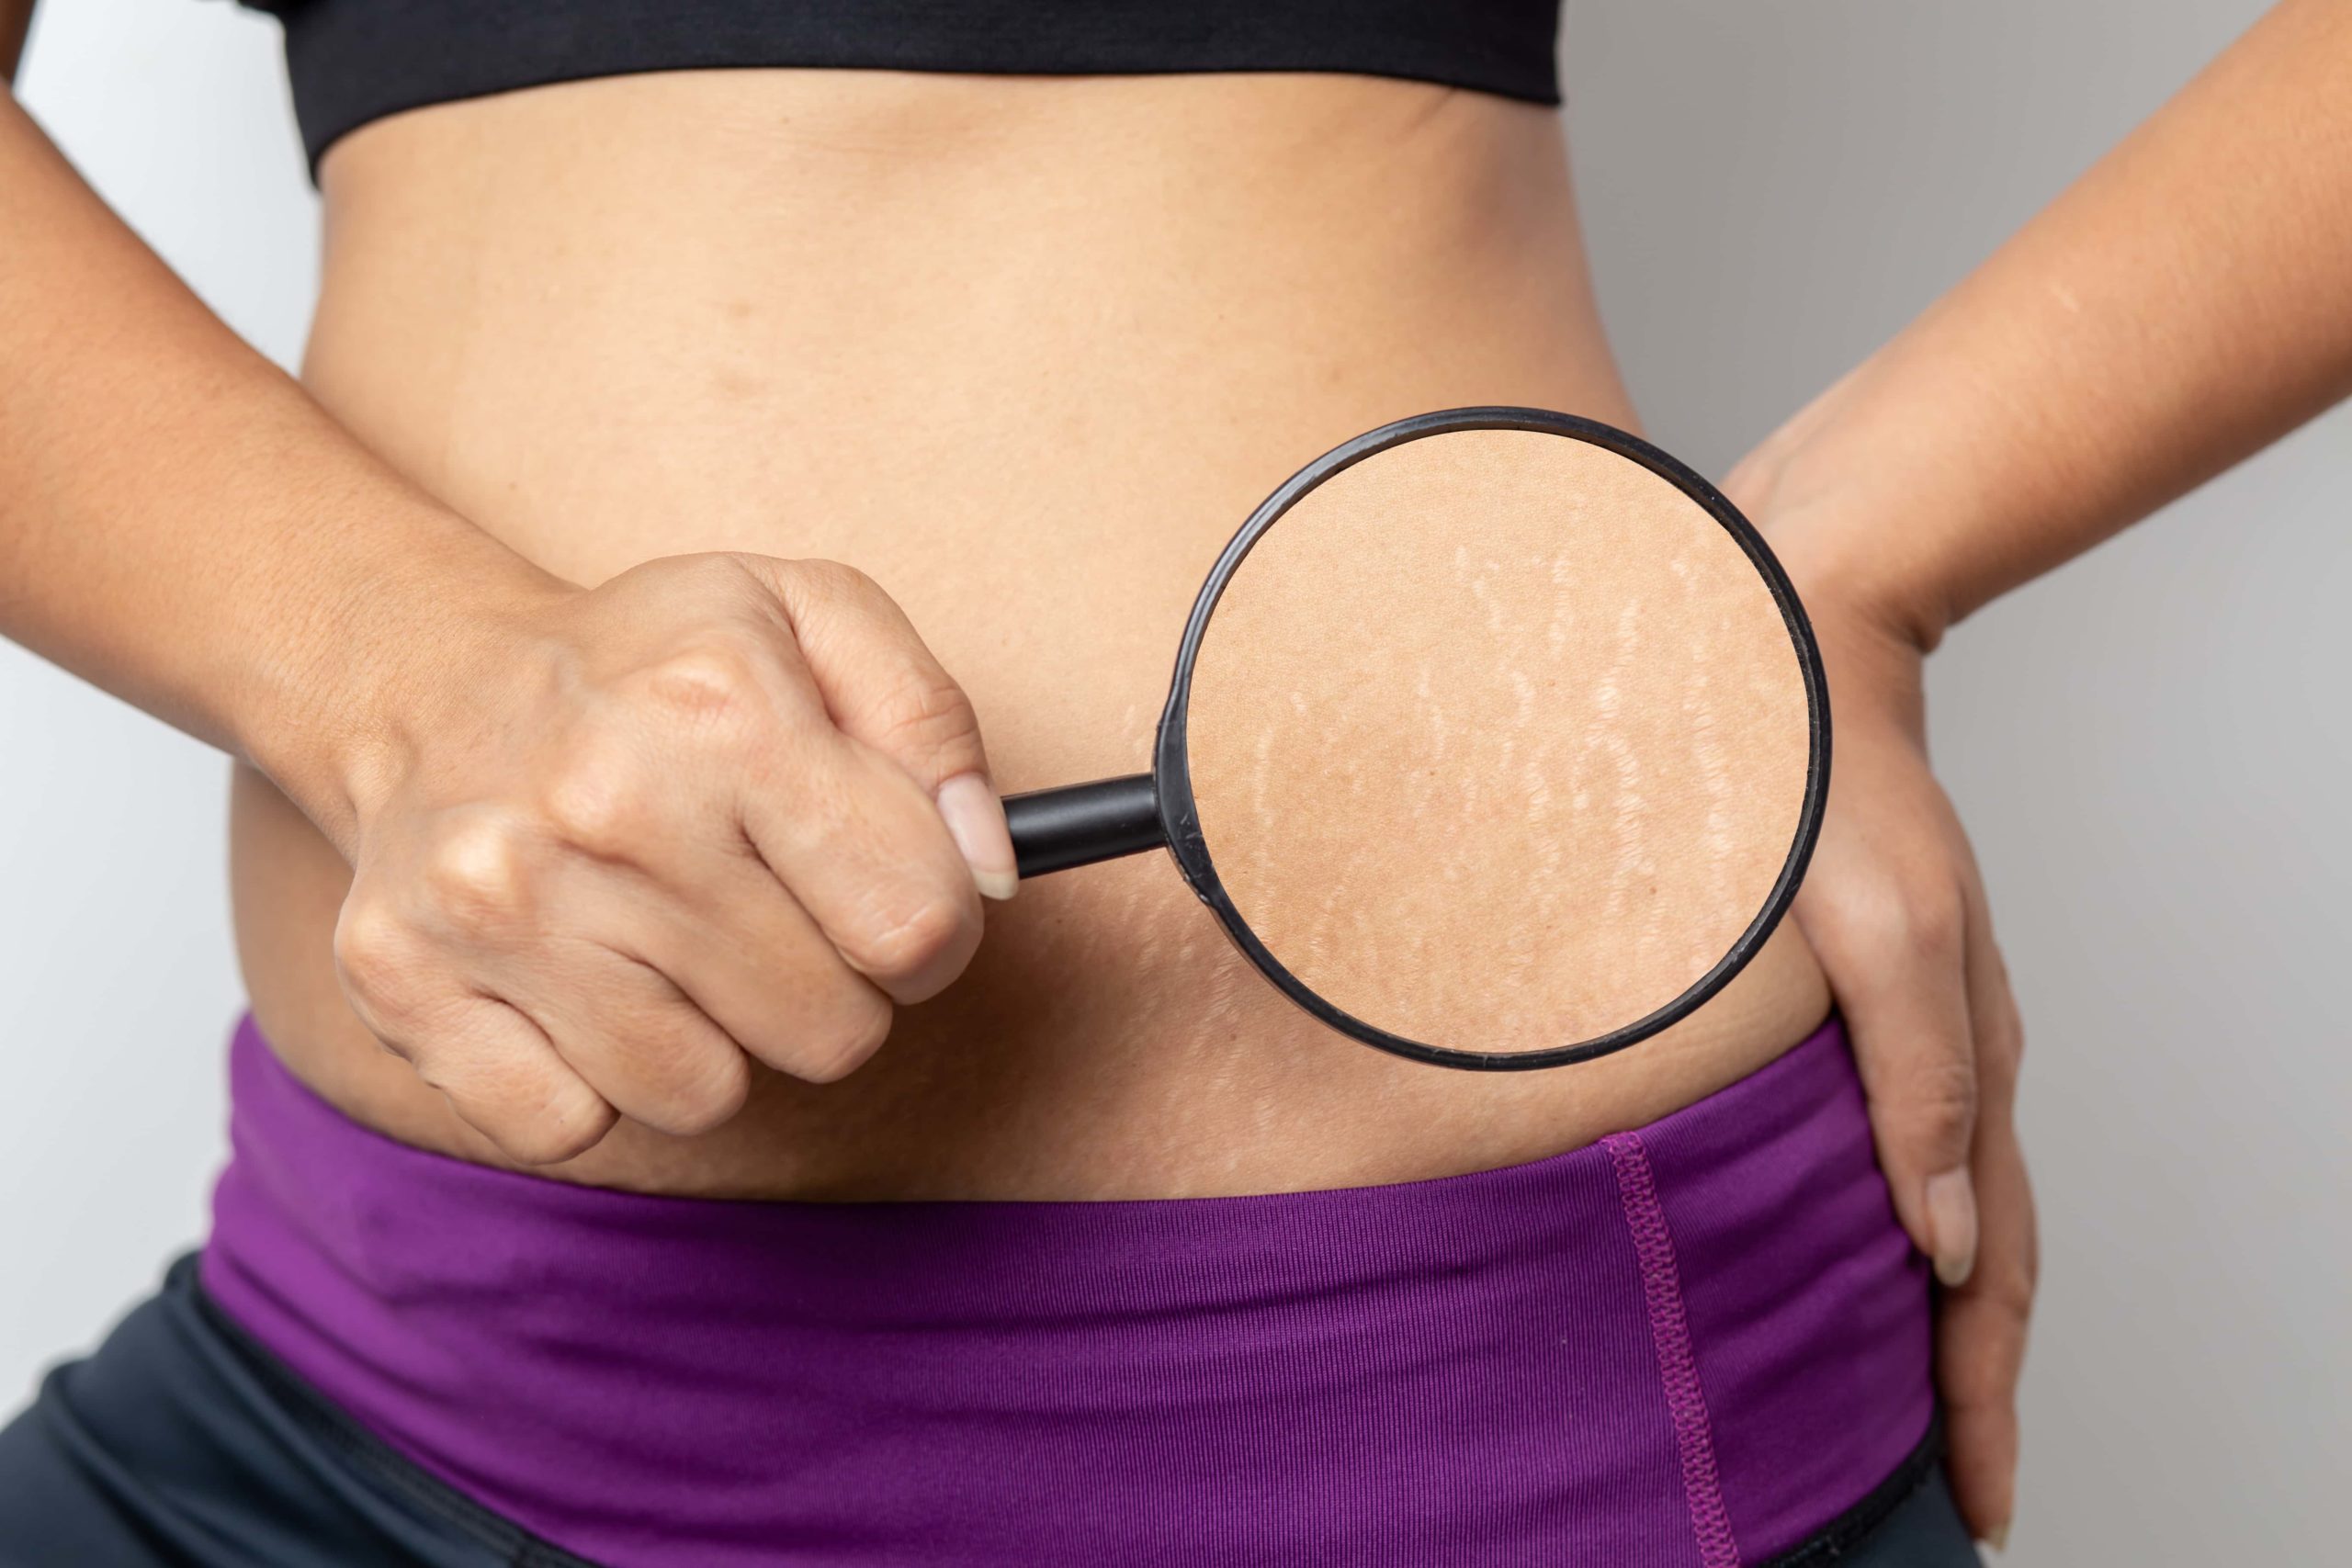 How Can I Get Rid of Stretch Marks Permanently